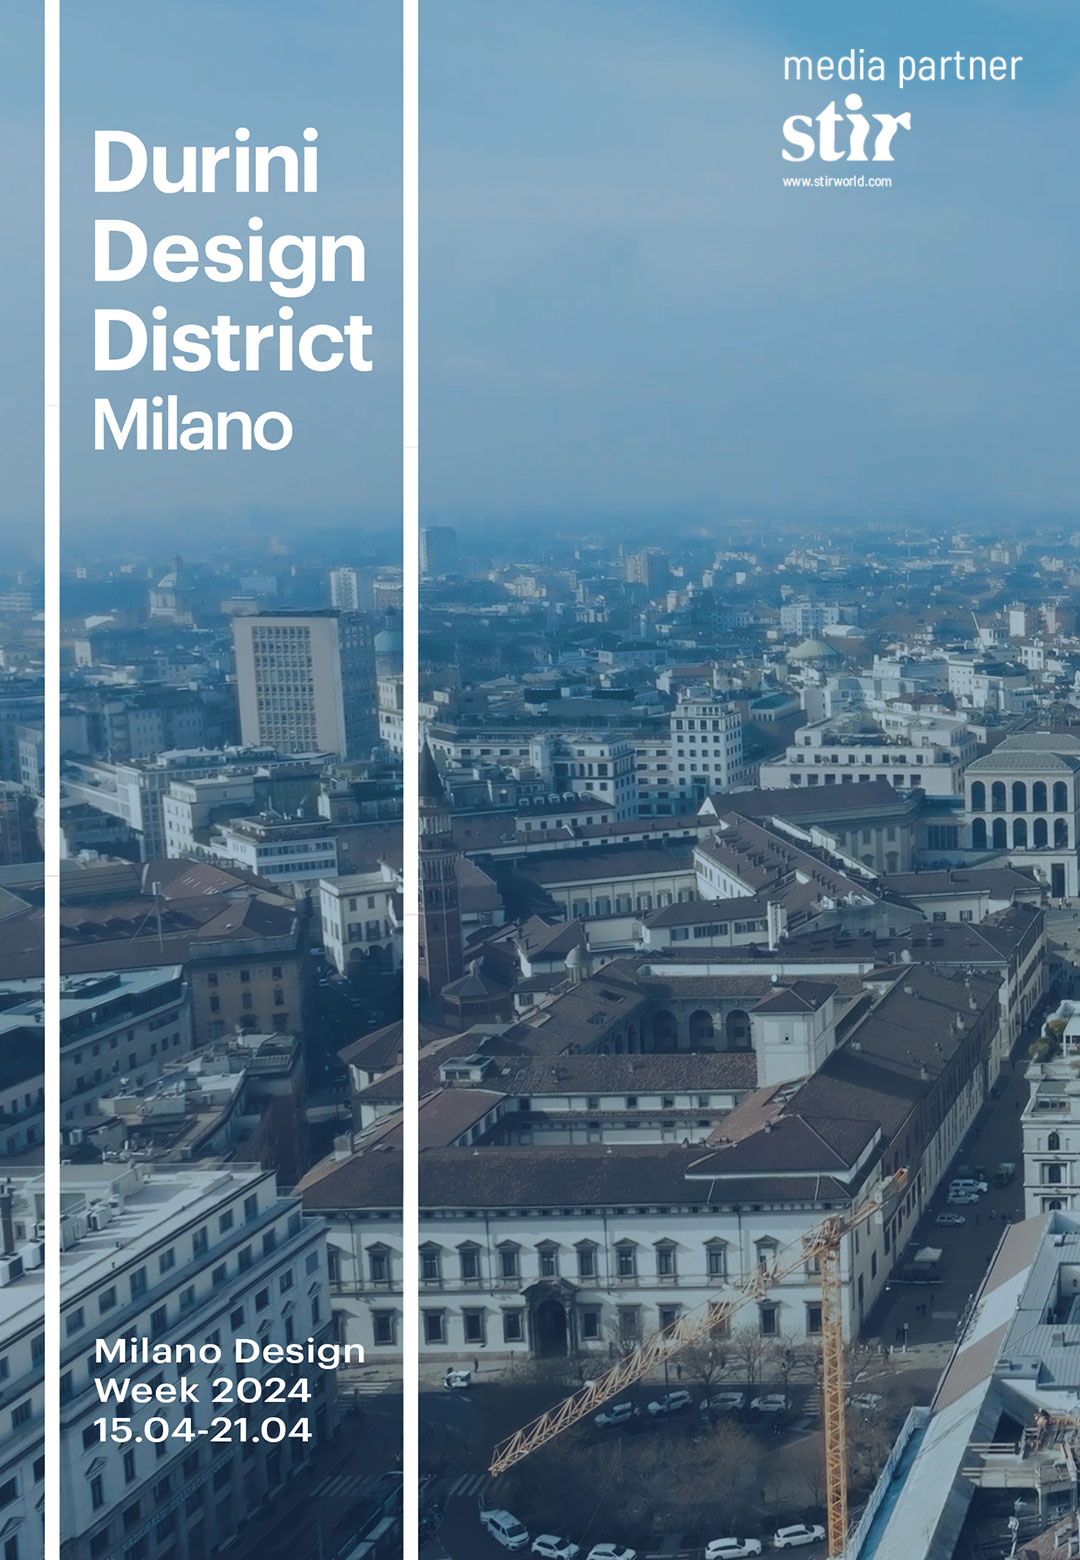 What to expect at Colour Design Experience of Durini Design District Milano 2024